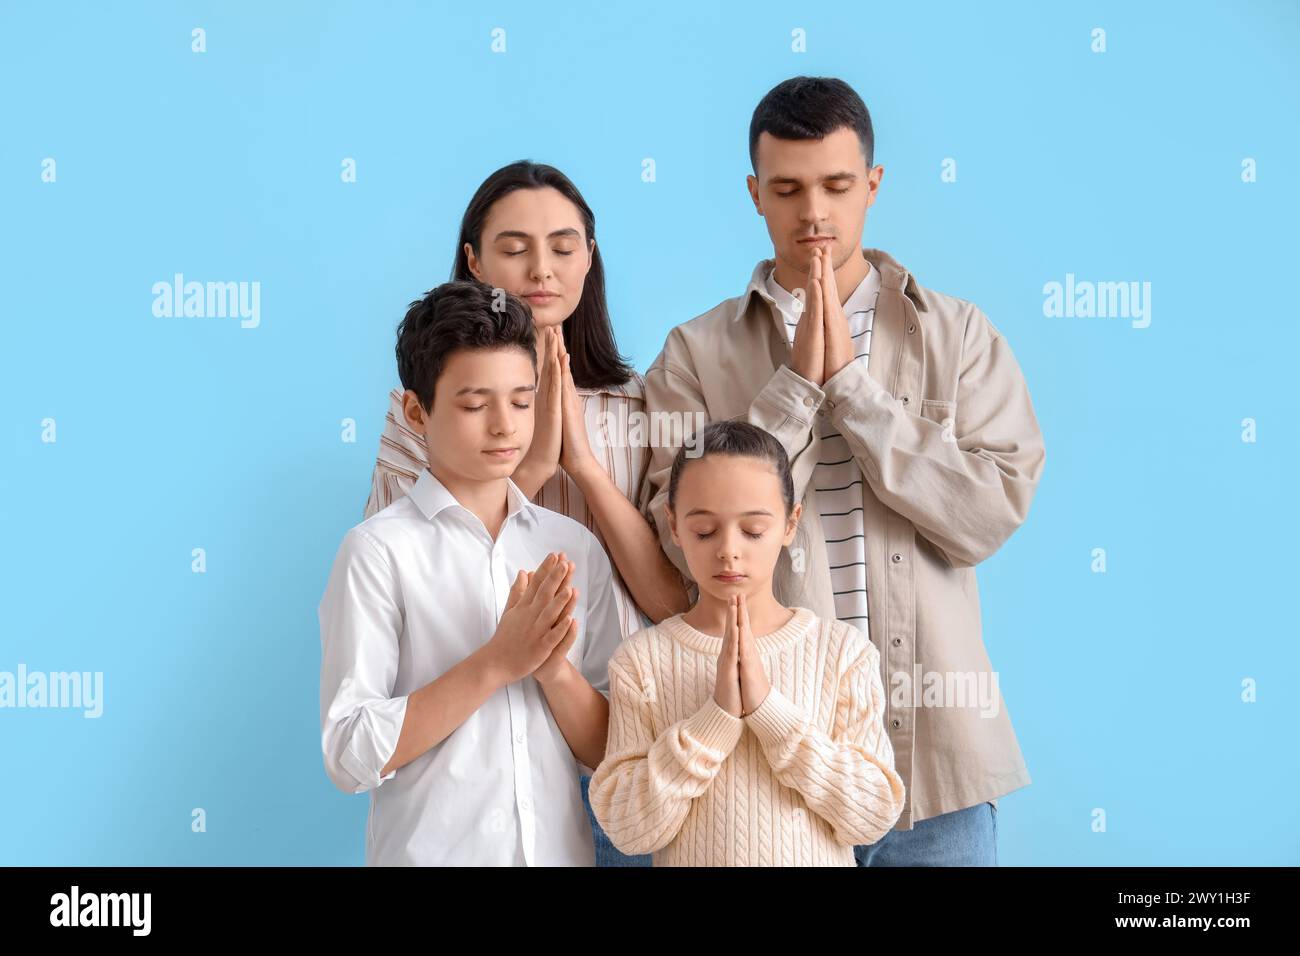 Family praying together on blue background Stock Photo